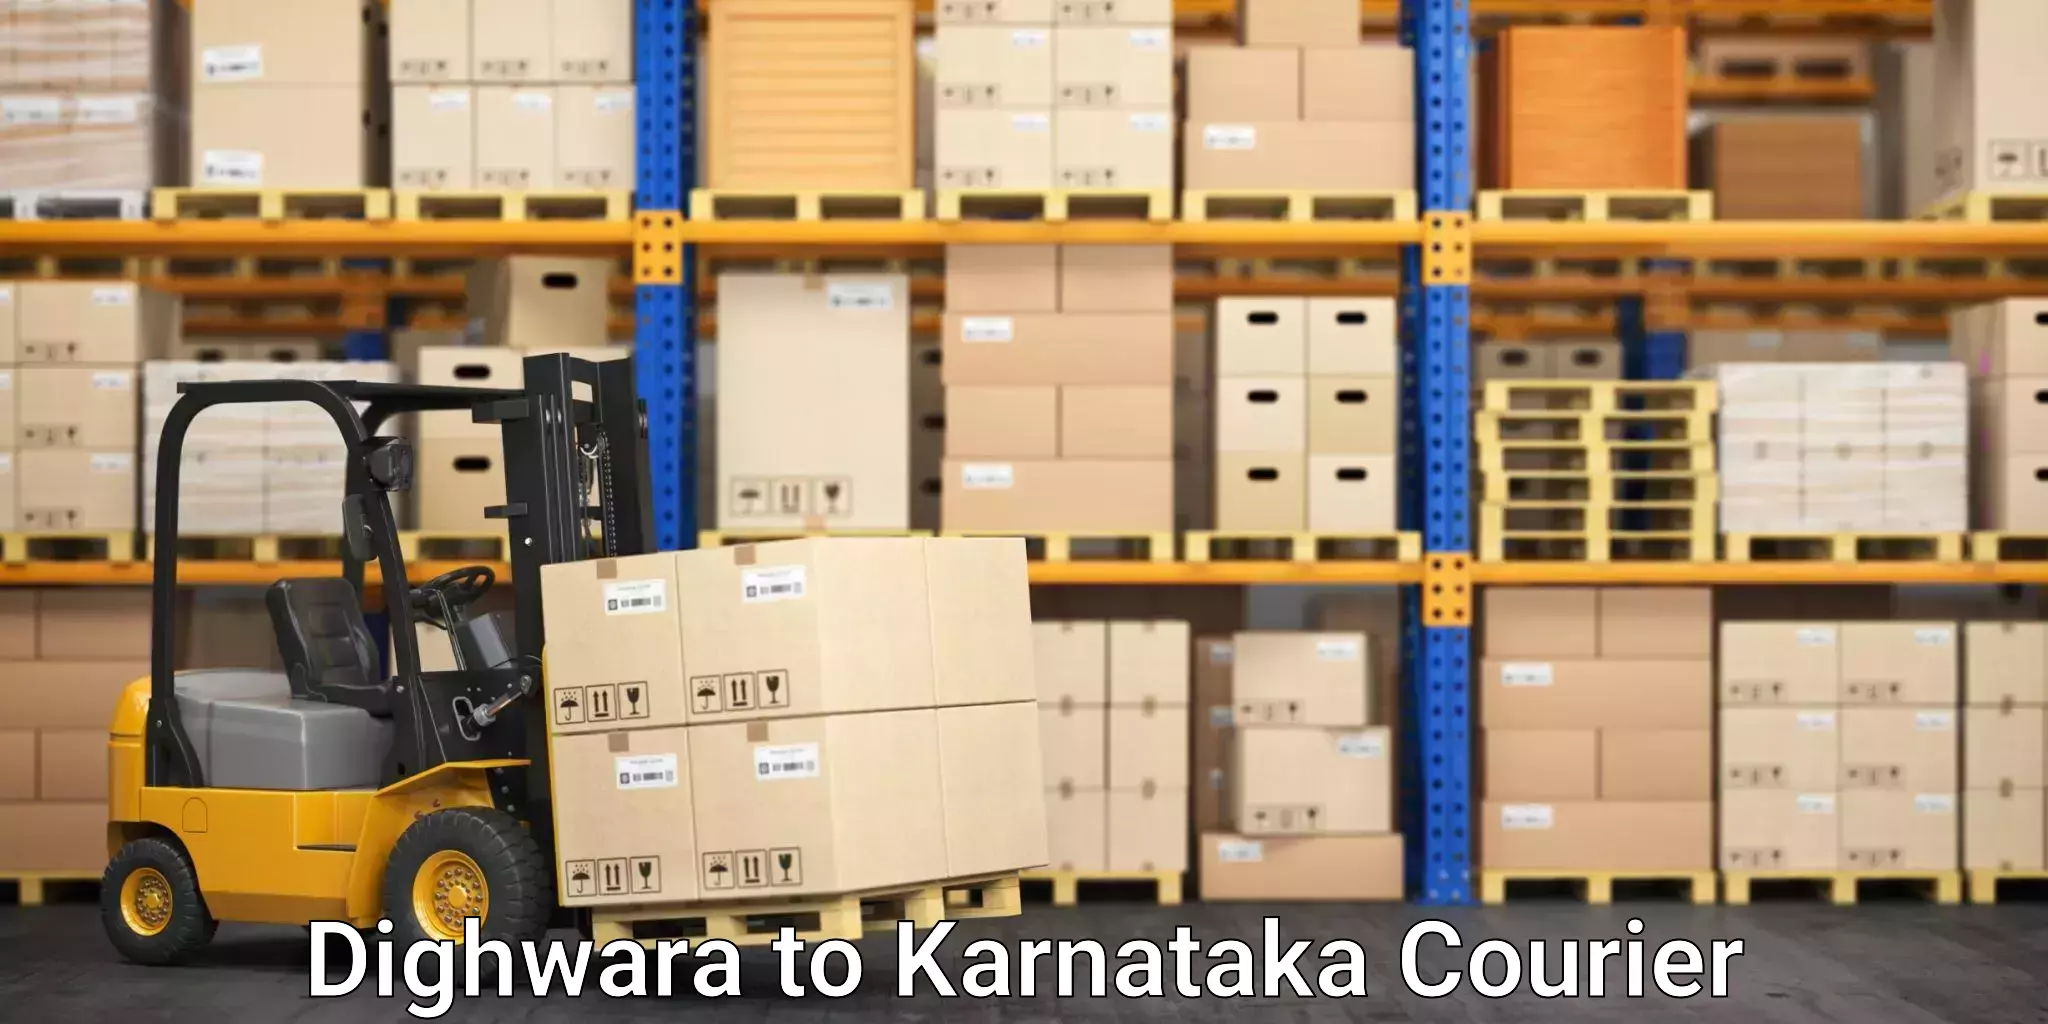 Cost-effective moving options Dighwara to Kollegal